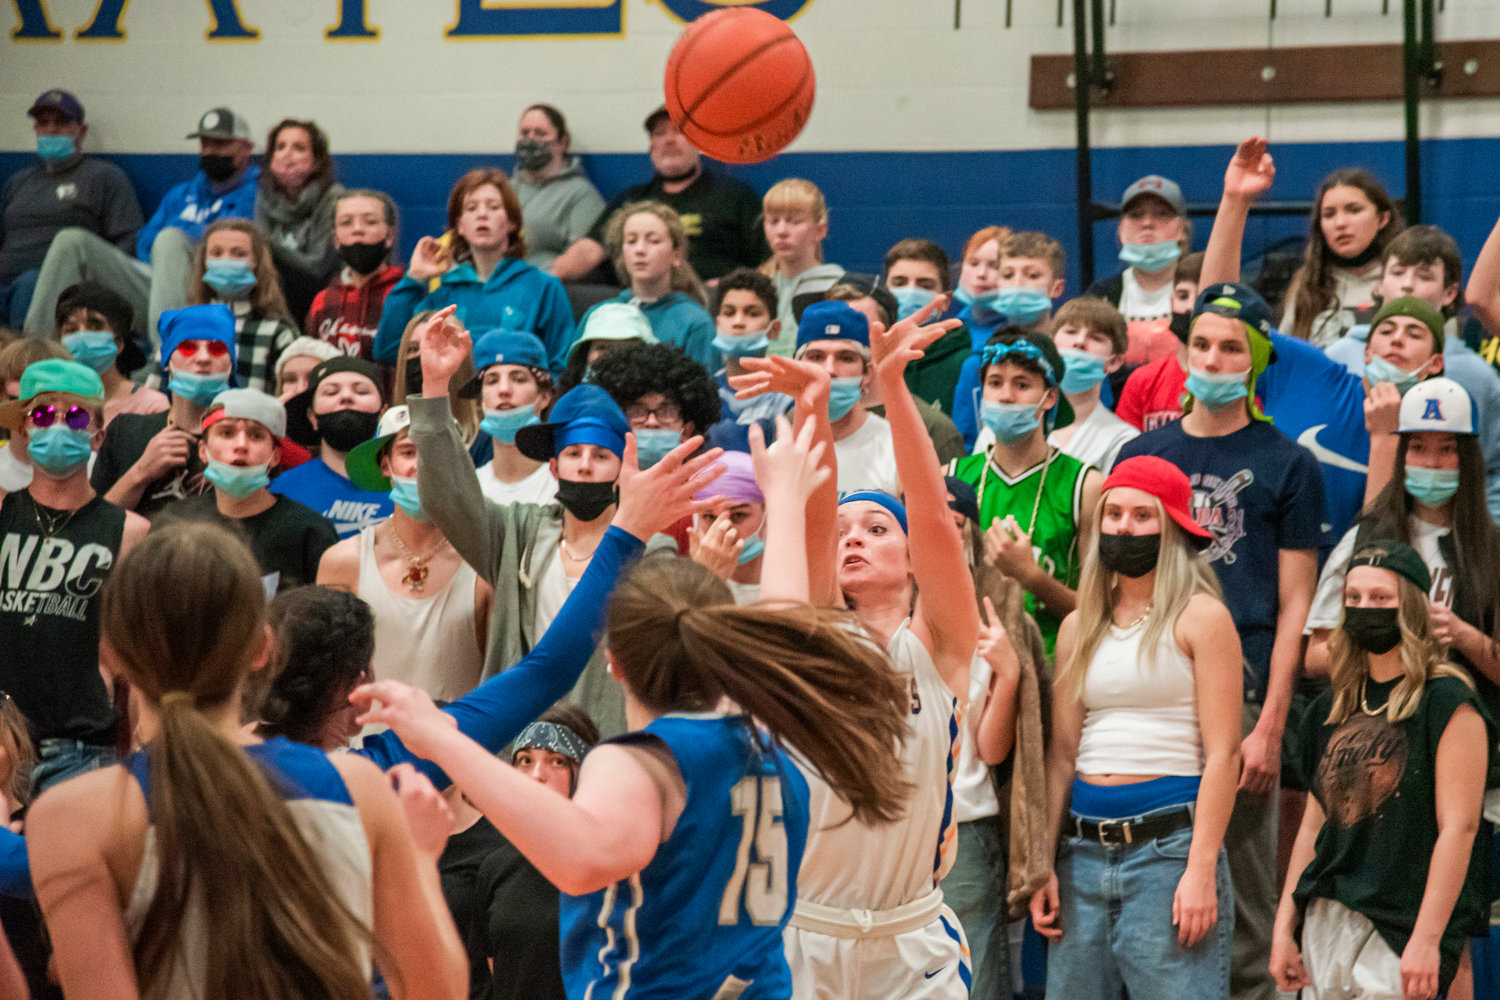 Adna’s Kaylin Todd (5) makes a 3-point shot during a game against La Center Wednesday night.